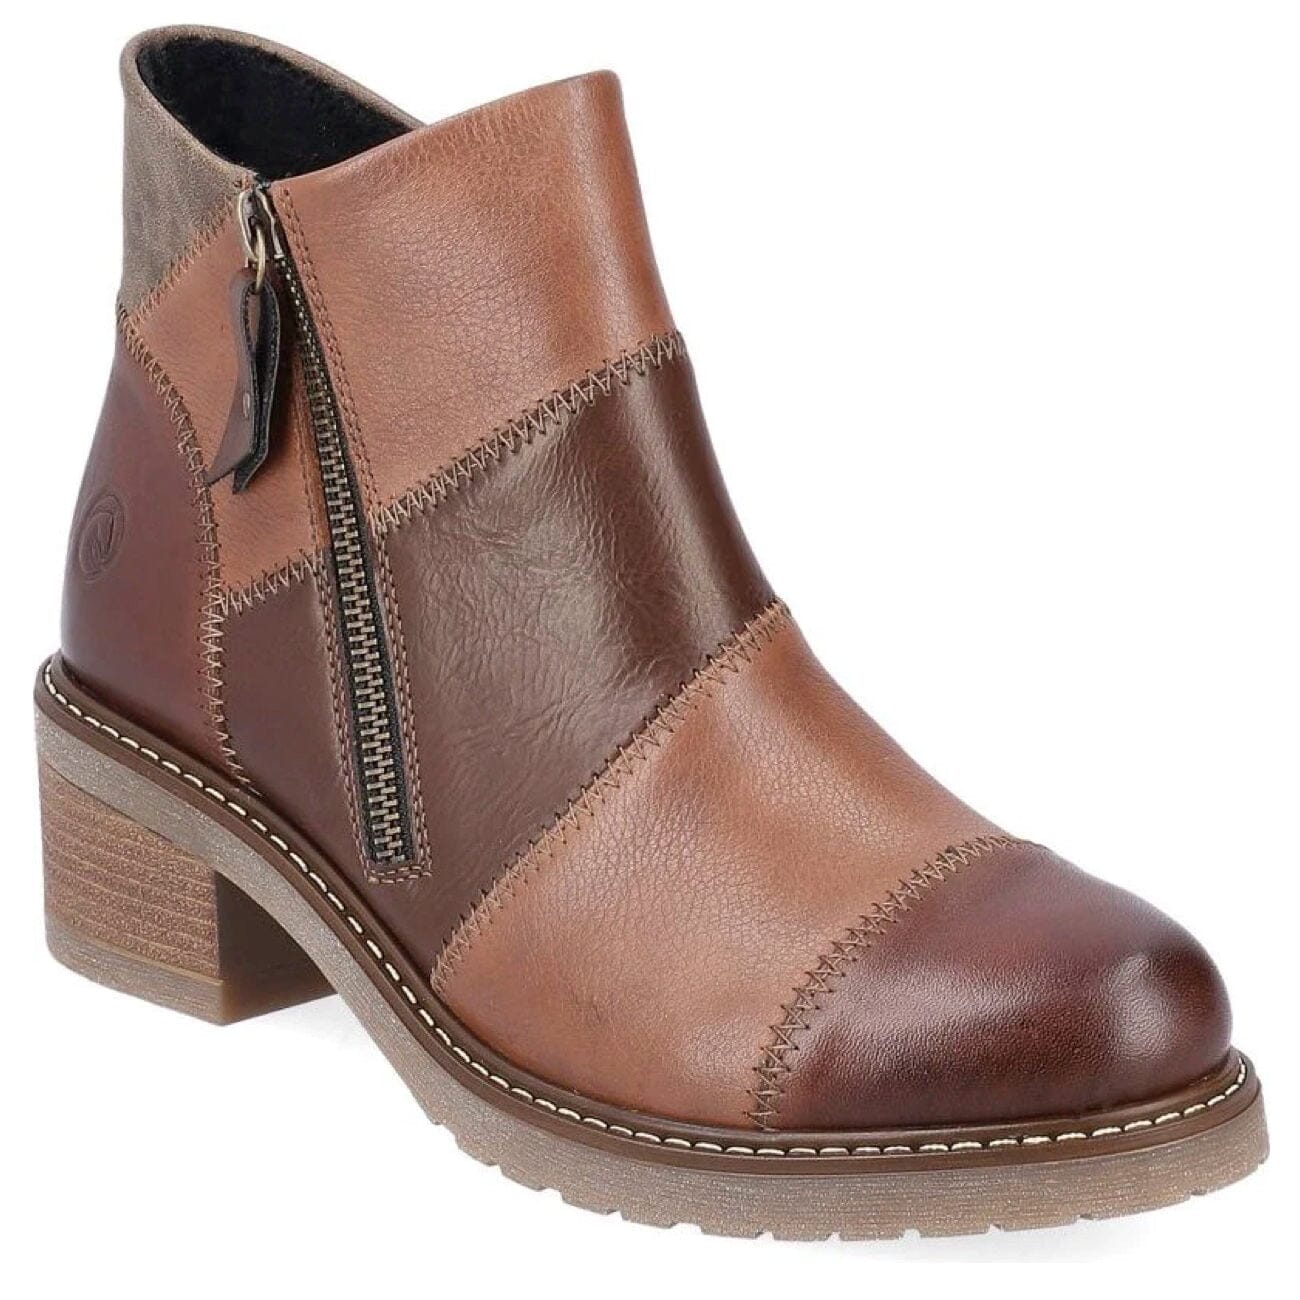 Remonte, D1A75-24, Boot, Leather, Chestnut Boots Remonte Chestnut 37 